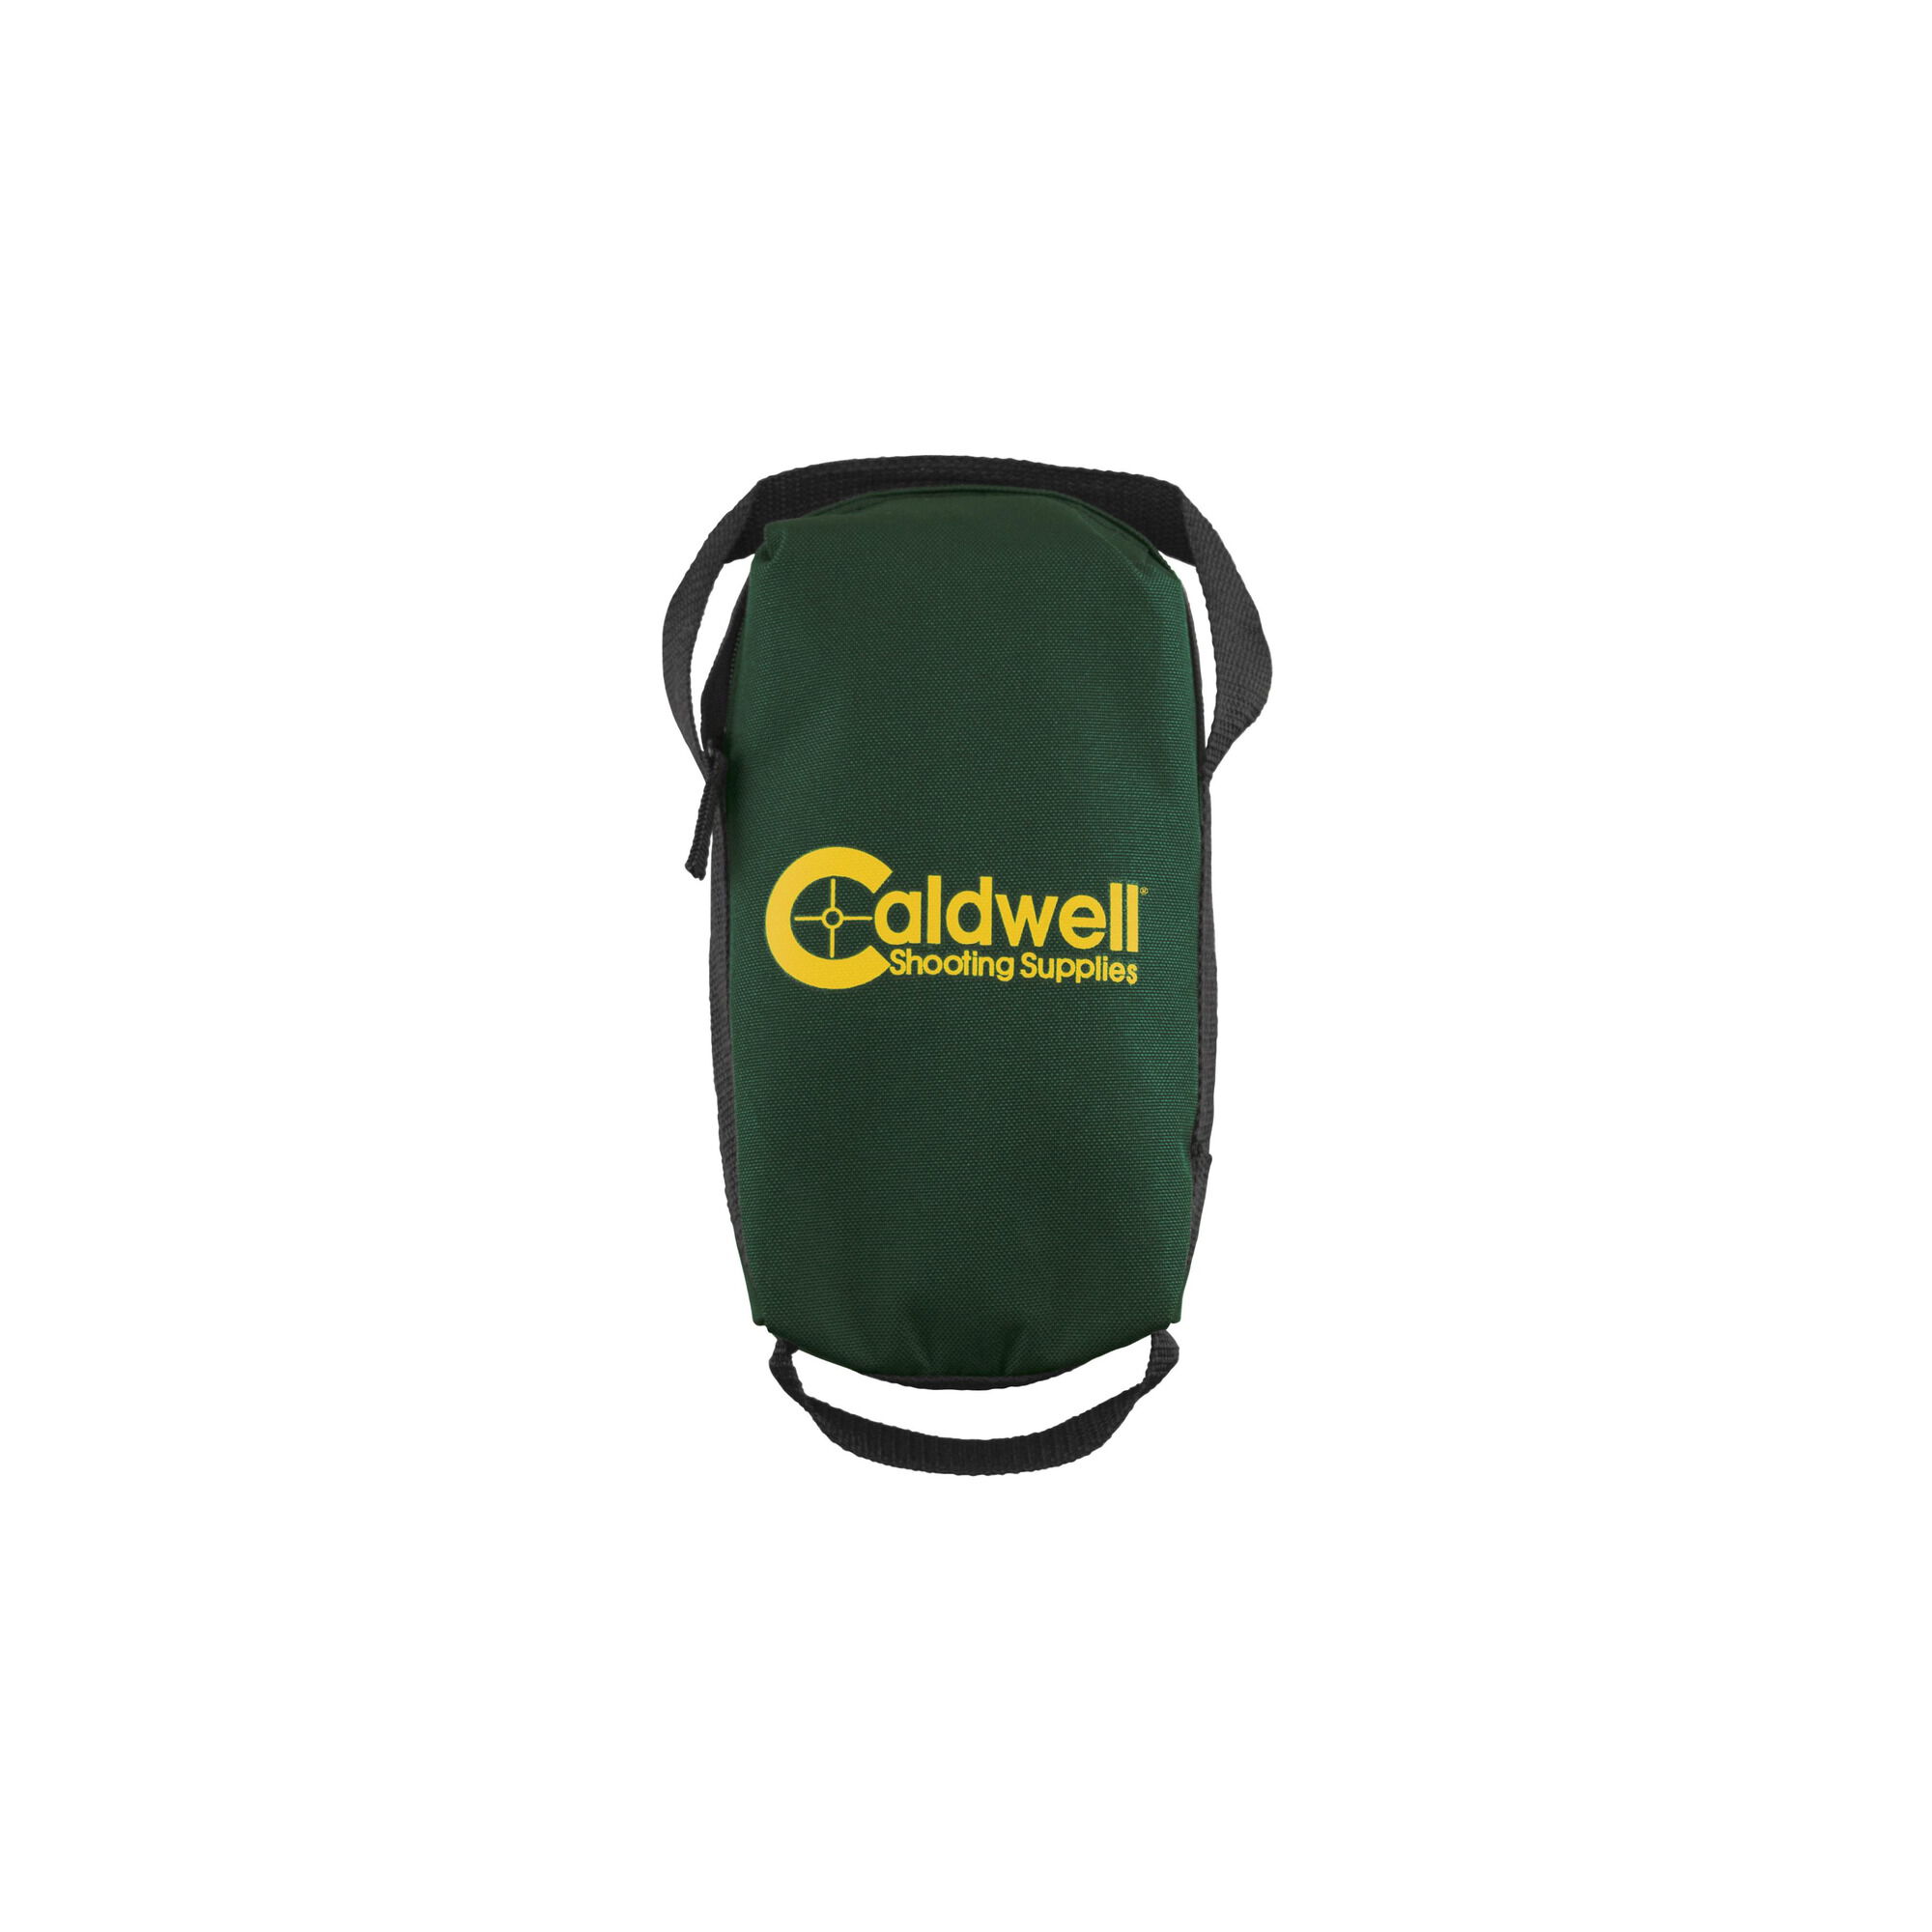 Caldwell Lead Sled Weight Bag for sale online 